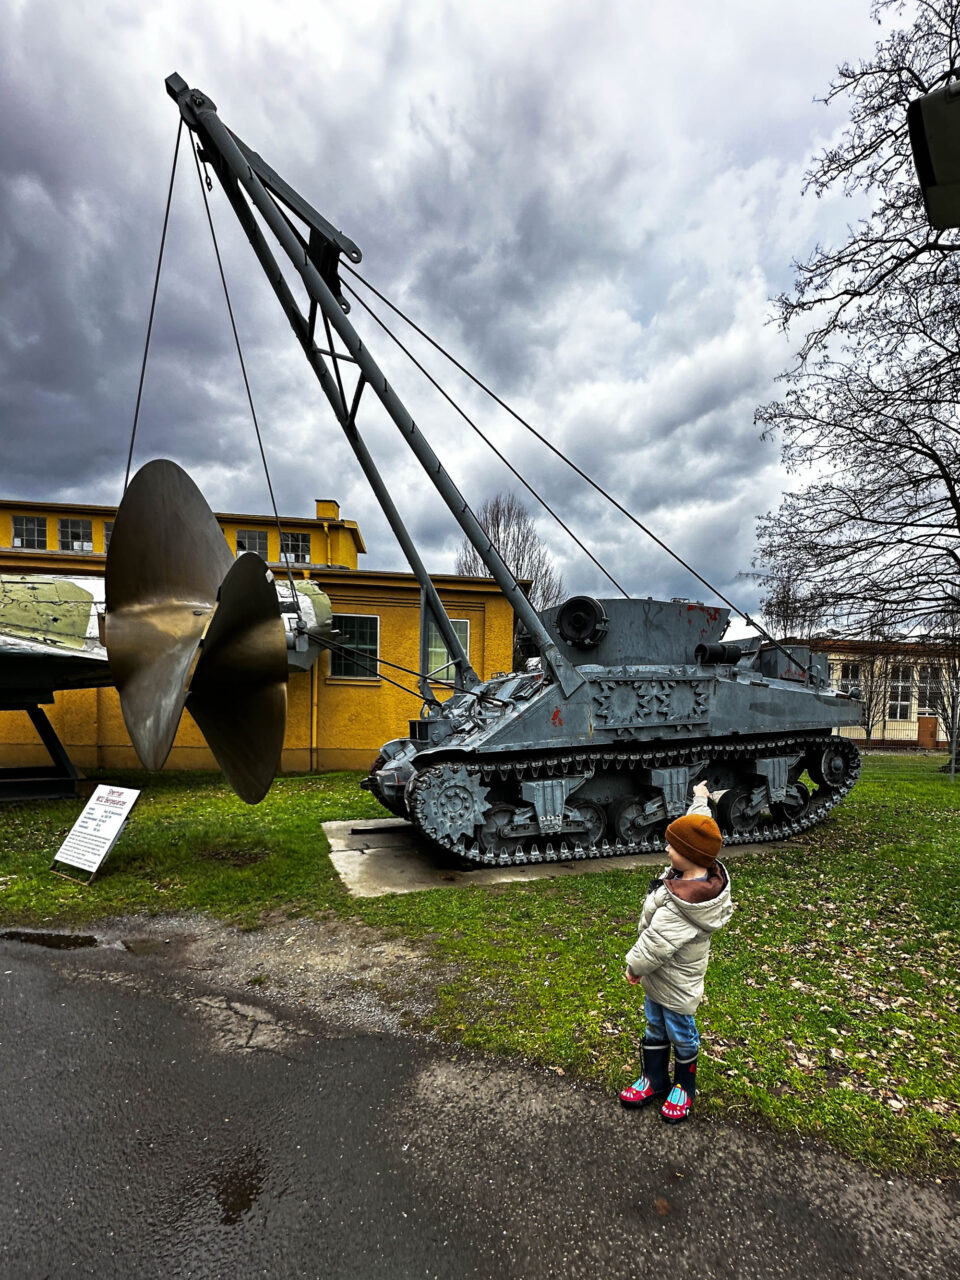 The outdoor space at the Speyer Technik Museum had the oddest collection of vehicles, like this tank crane.